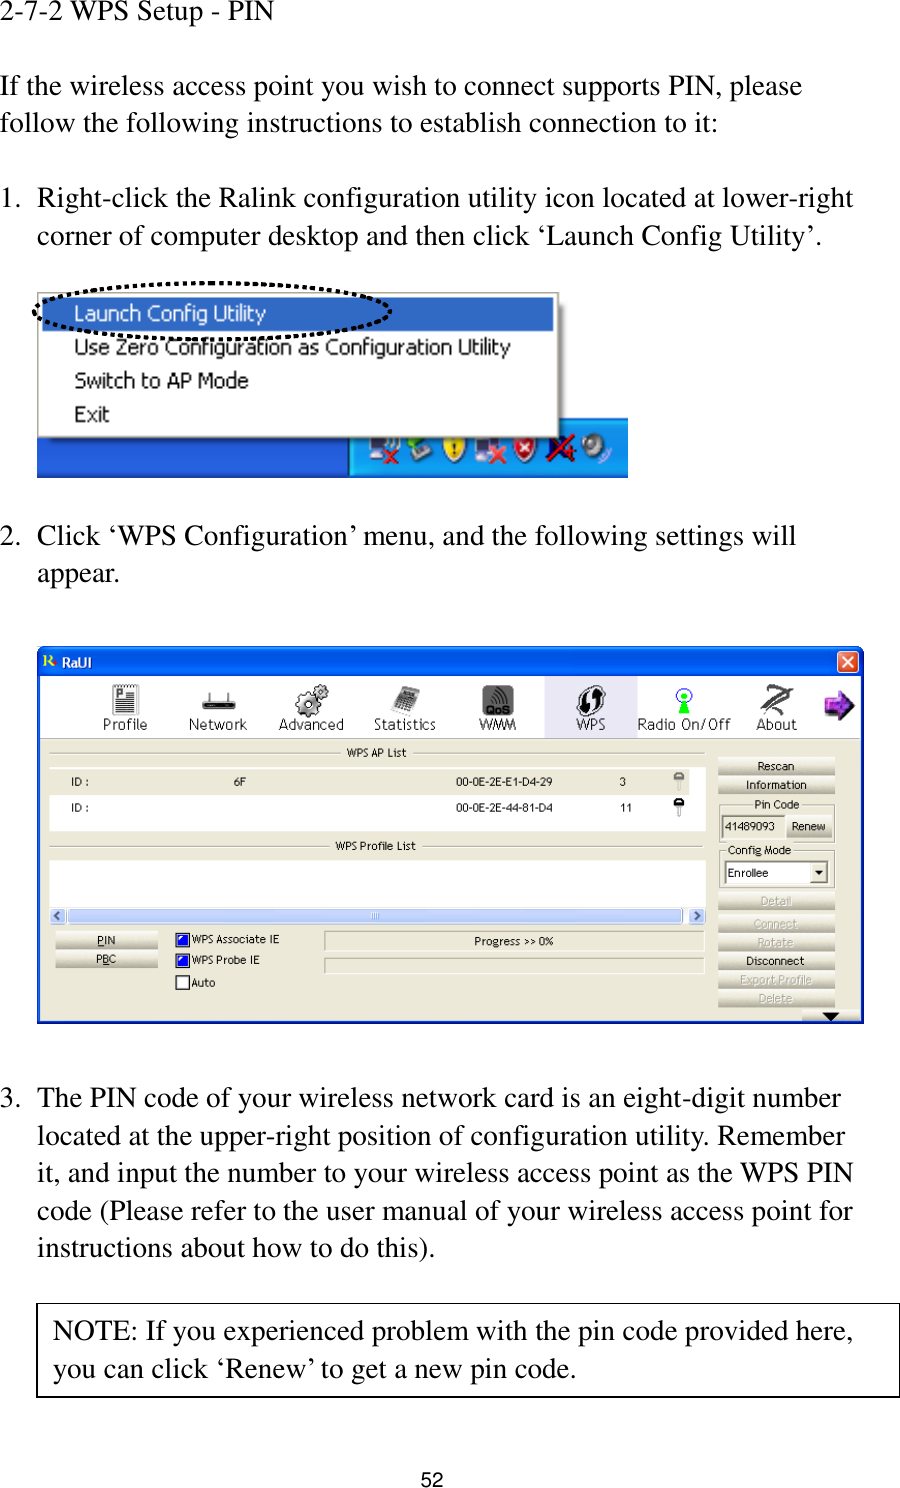  52 2-7-2 WPS Setup - PIN  If the wireless access point you wish to connect supports PIN, please follow the following instructions to establish connection to it:  1. Right-click the Ralink configuration utility icon located at lower-right corner of computer desktop and then click „Launch Config Utility‟.    2. Click „WPS Configuration‟ menu, and the following settings will appear.    3. The PIN code of your wireless network card is an eight-digit number located at the upper-right position of configuration utility. Remember it, and input the number to your wireless access point as the WPS PIN code (Please refer to the user manual of your wireless access point for instructions about how to do this).     NOTE: If you experienced problem with the pin code provided here, you can click „Renew‟ to get a new pin code. 